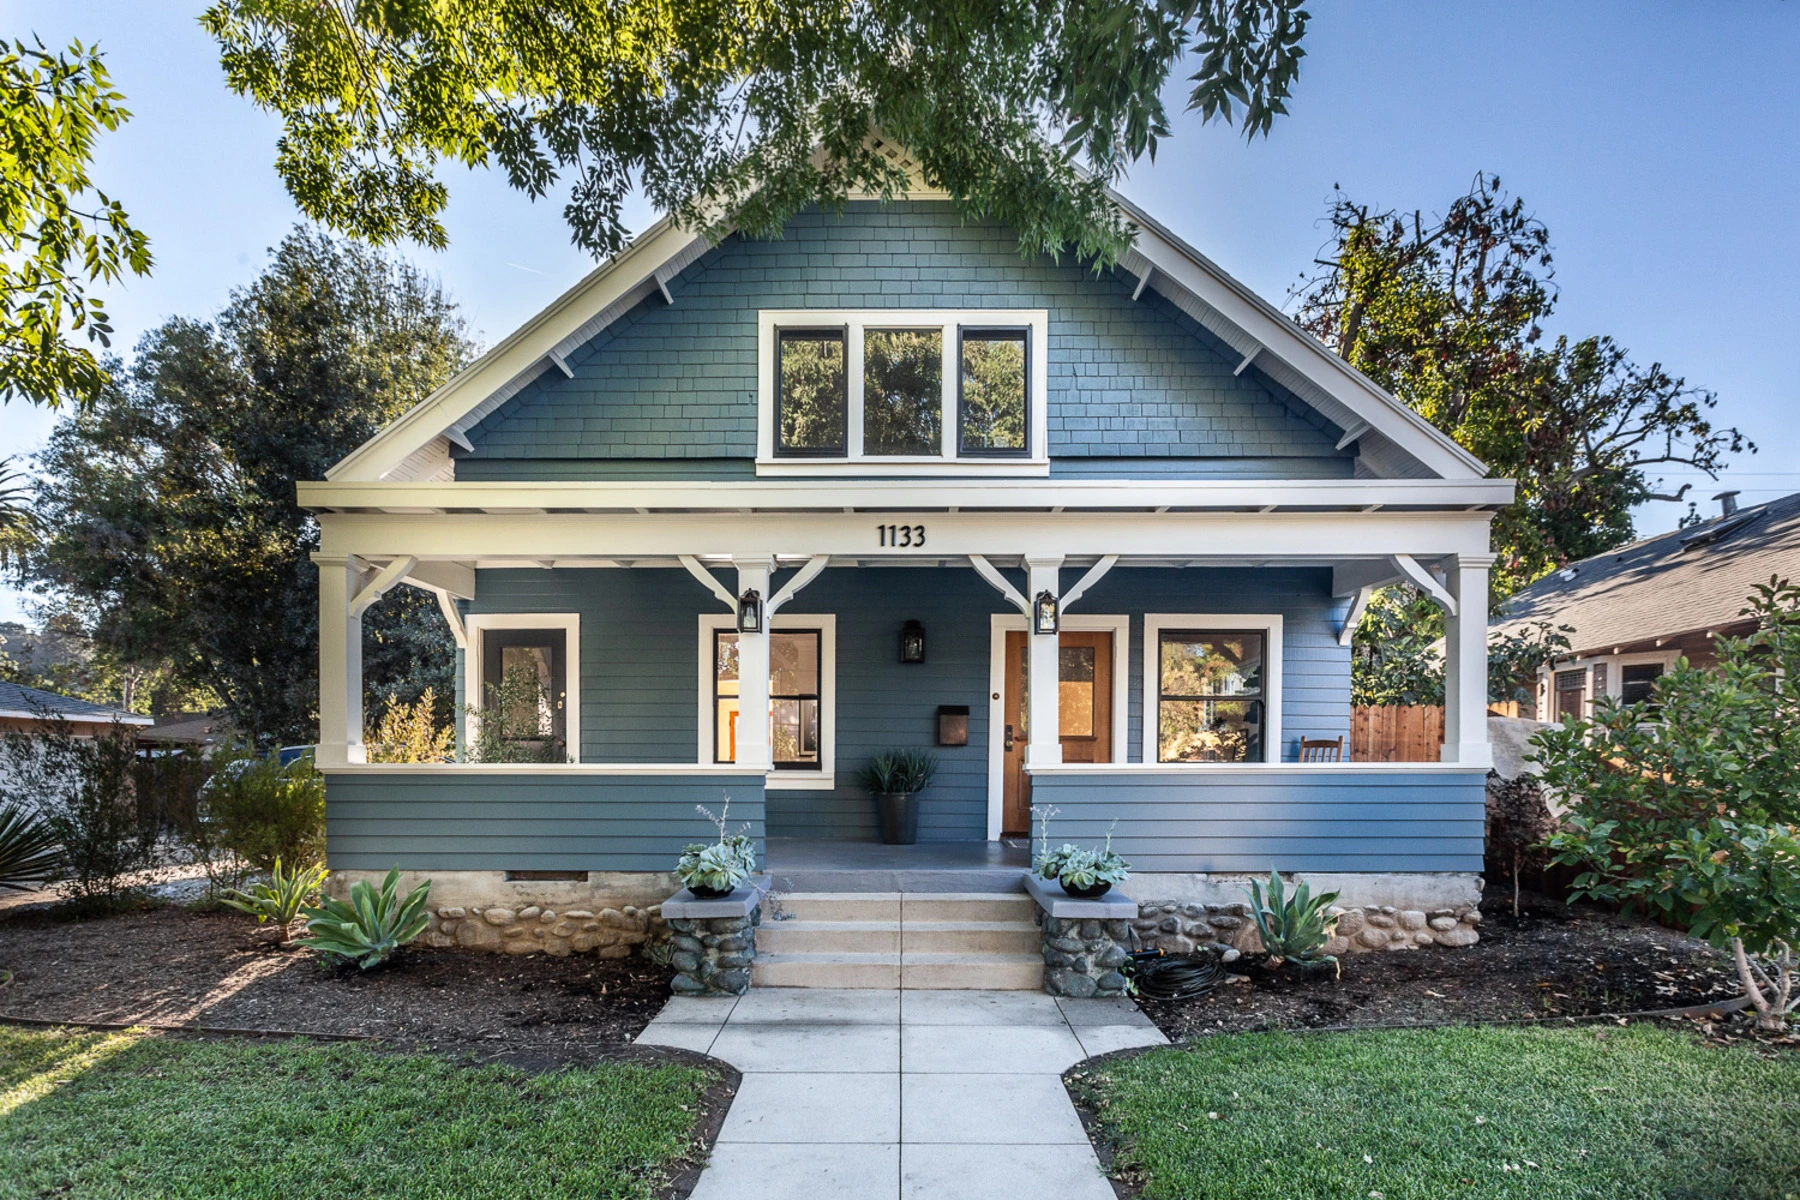 Restored craftsman exterior with custom details and a covered porch.